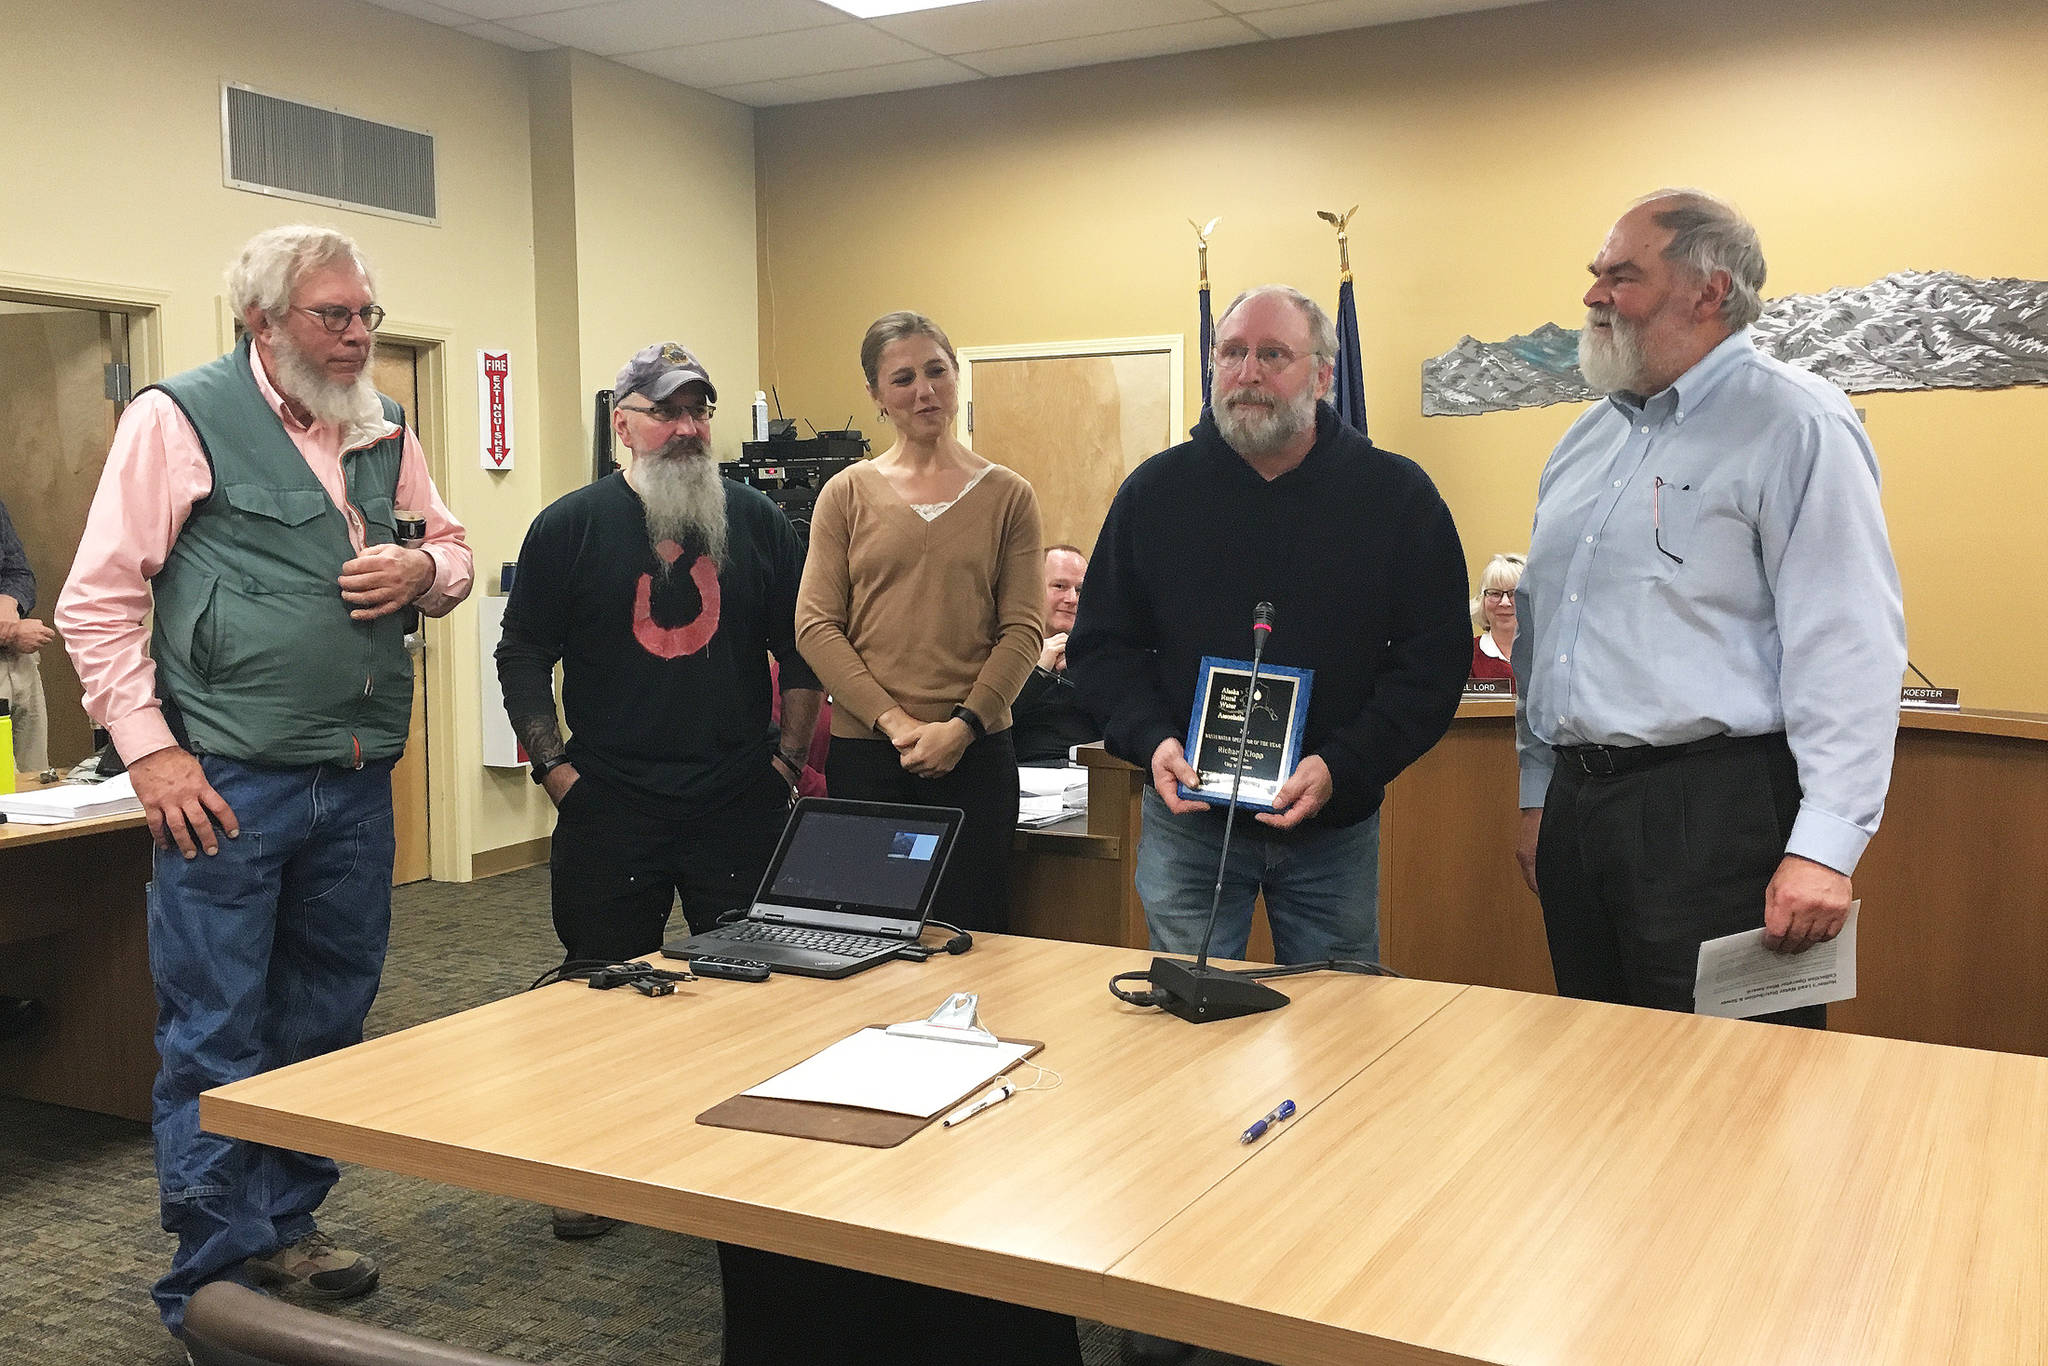 From left to right: Public Works Director Carey Meyer, Water and Sewer Superintendent Todd Cook, City Manager Katie Koester, Richard Klopp, lead water distribution and wastewater collection operator, and Mayor Ken Castner celebrate Klopp being named Wastewater Operator of the Year award by the Alaska Rural Water Association during the Monday, Nov. 26, 2018 Homer City Council meeting at Homer City Hall in Homer, Alaska. (Photo by Megan Pacer/Homer News)